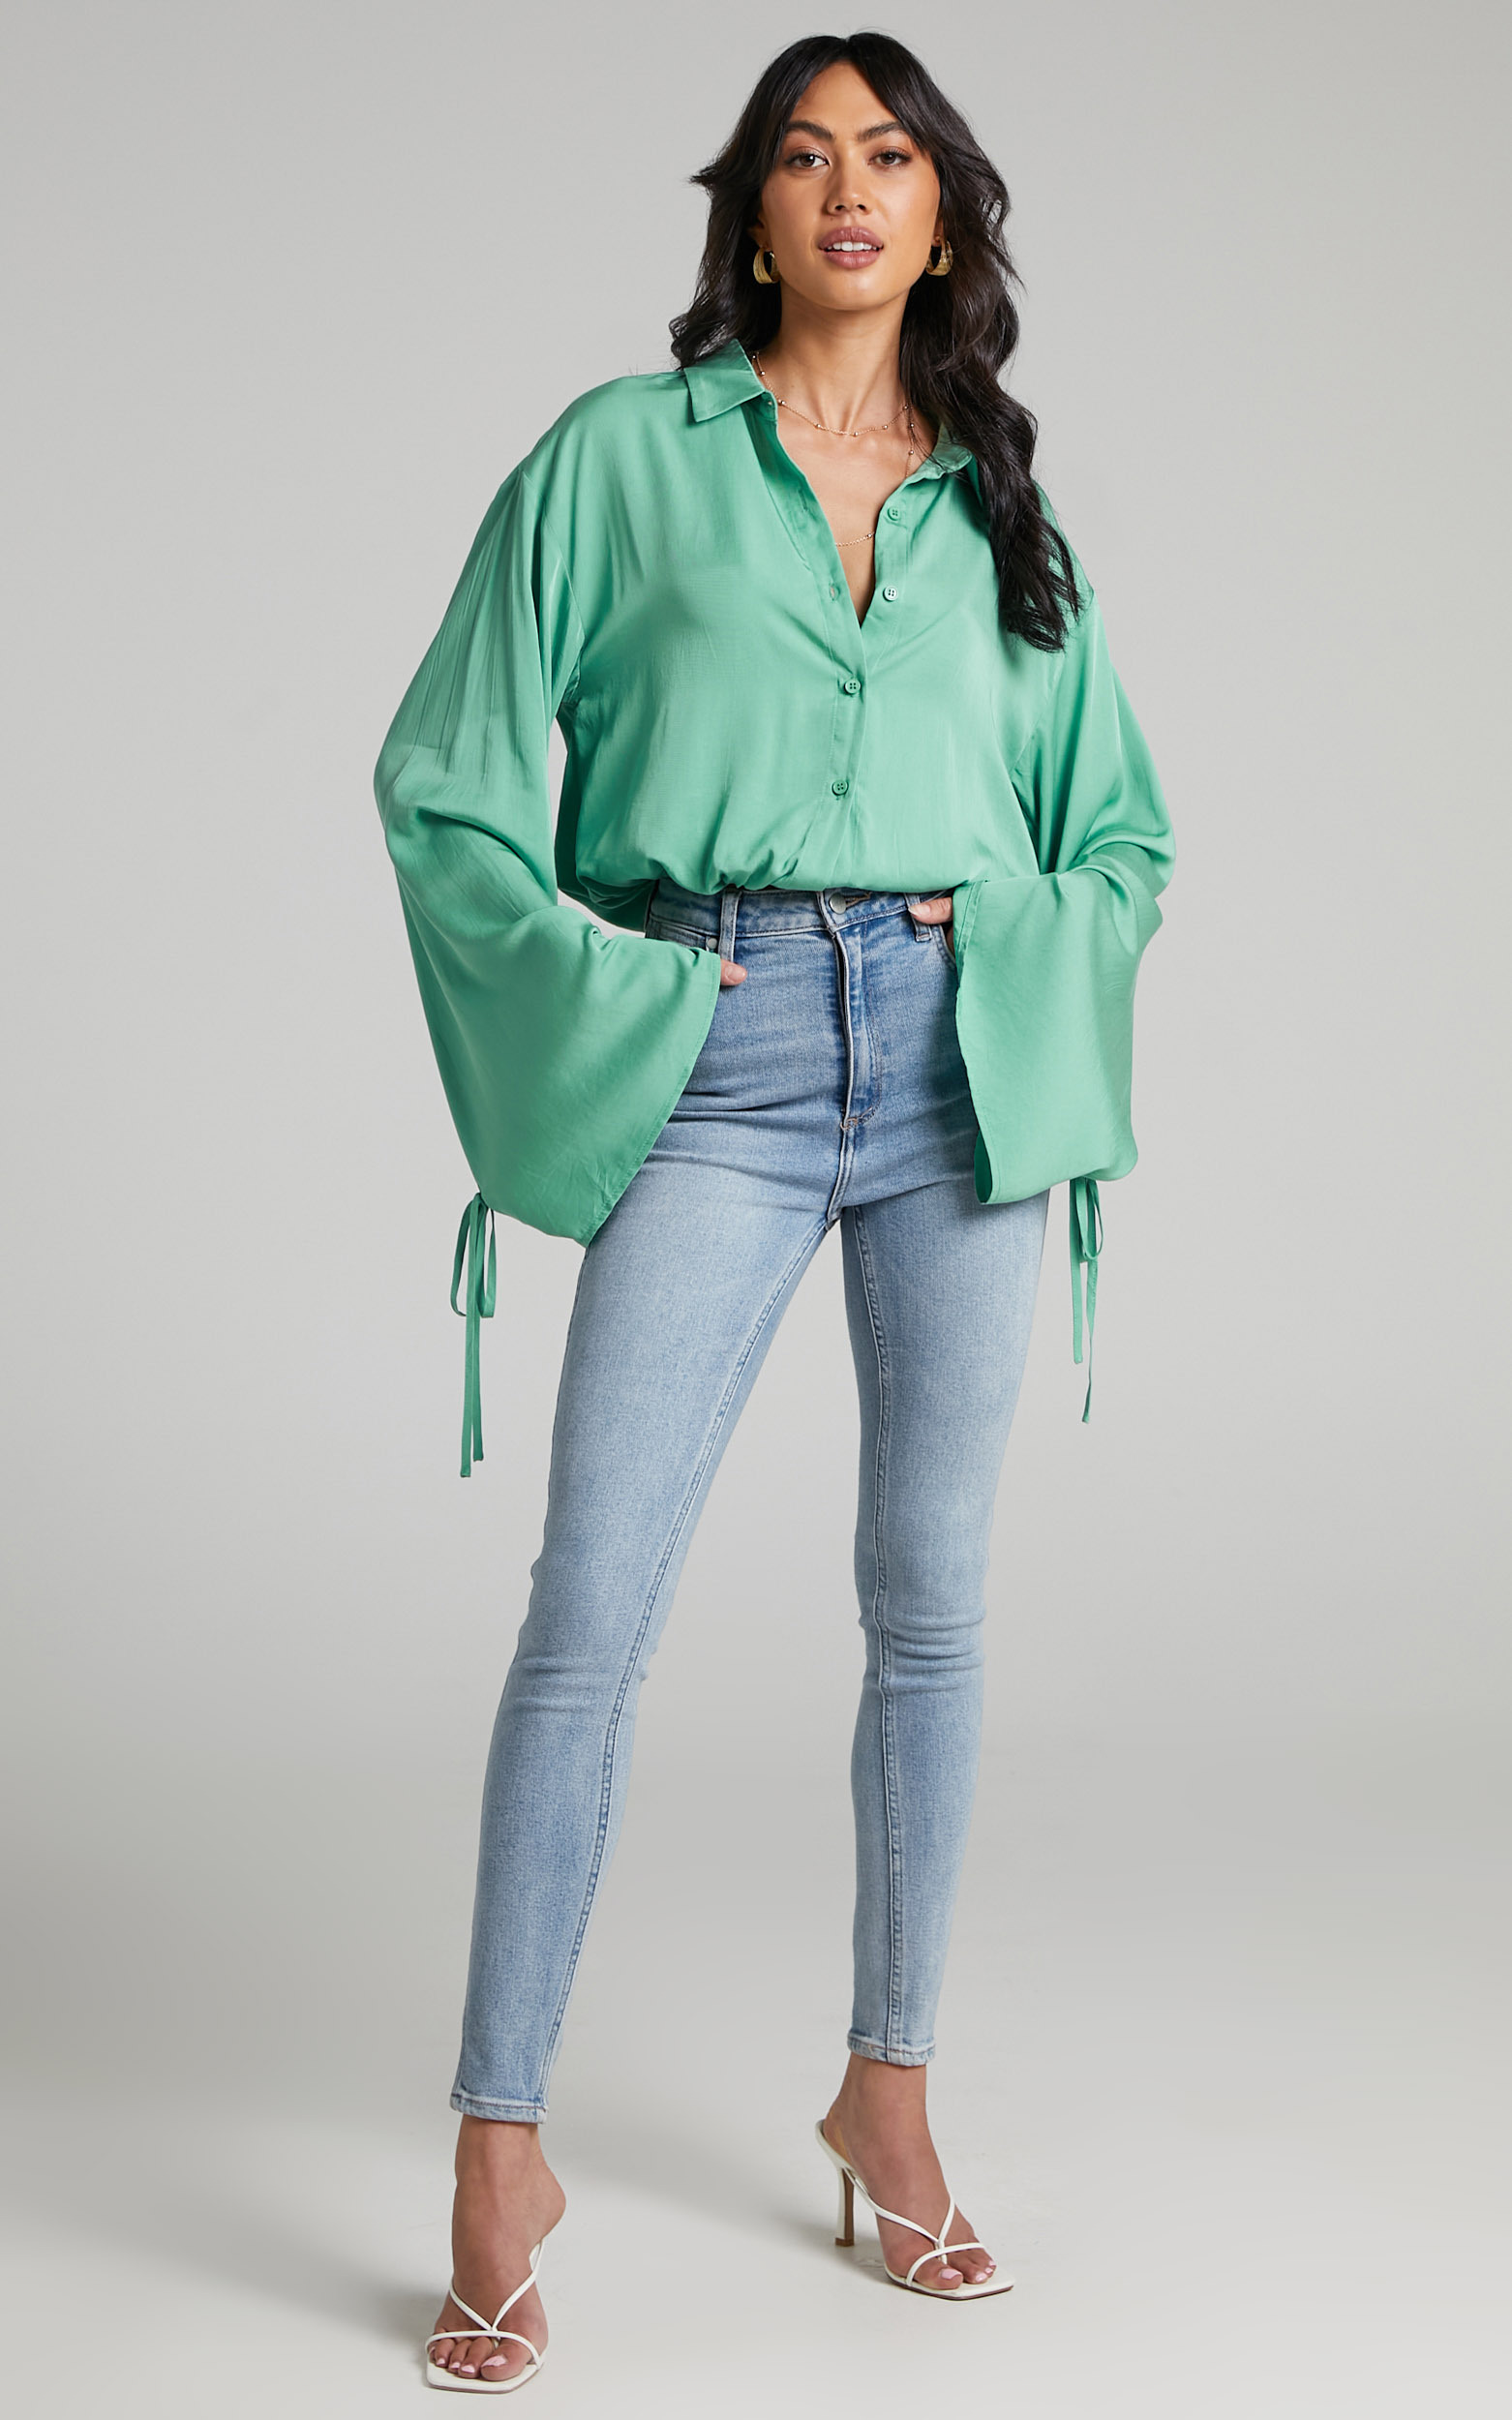 Wanda Button up Shirt in Seafoam - 06, GRN3, hi-res image number null